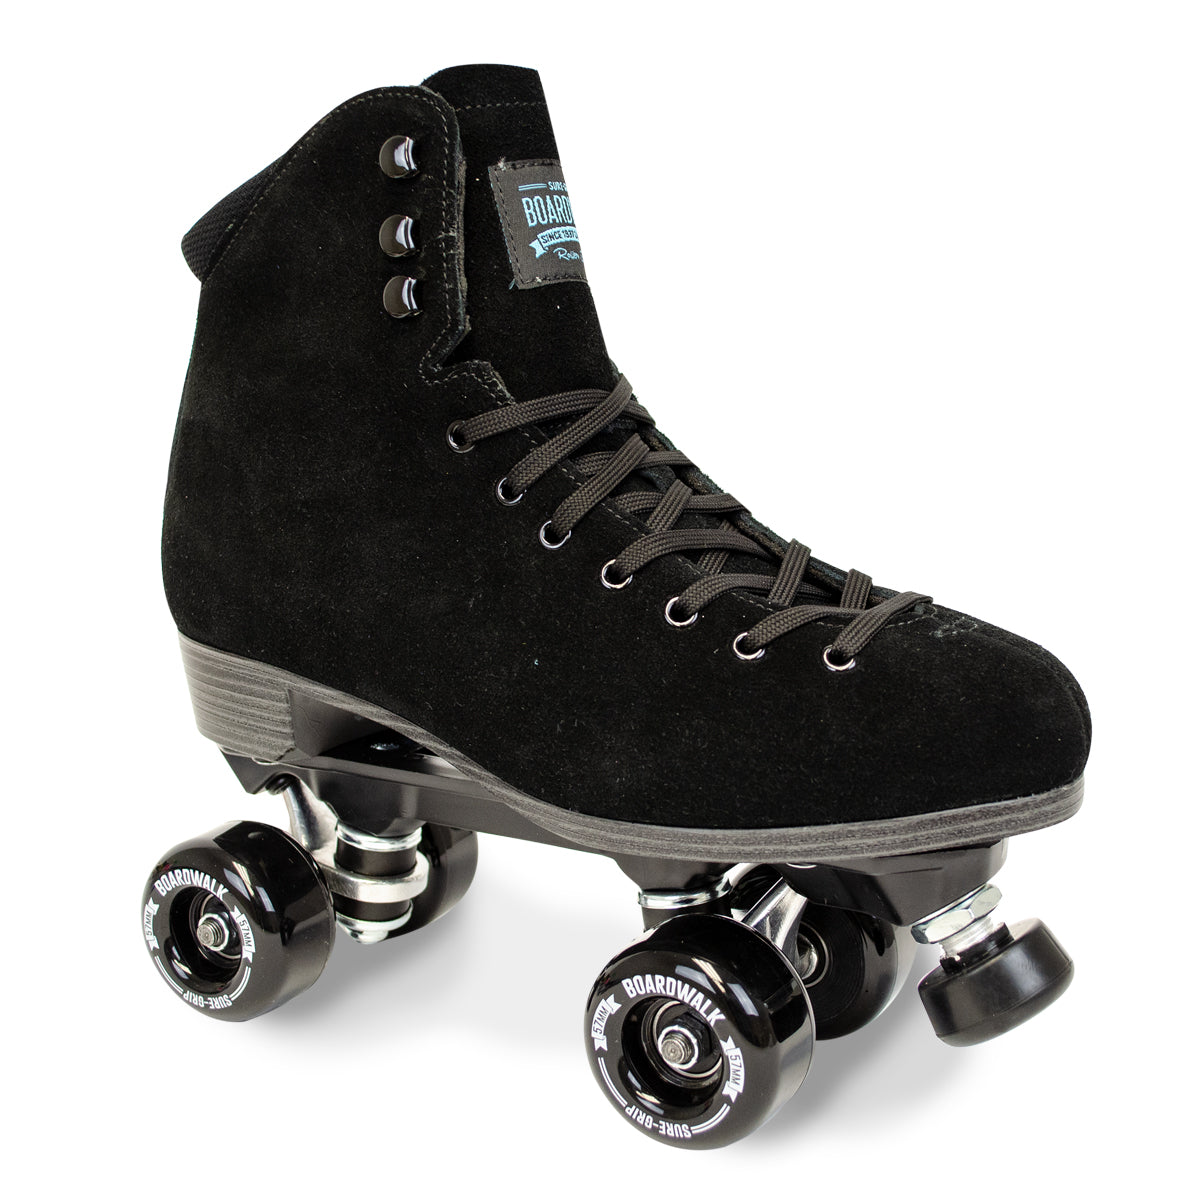 Sure-Grip Invader 700 Trucks now available at Offset Skate Supply